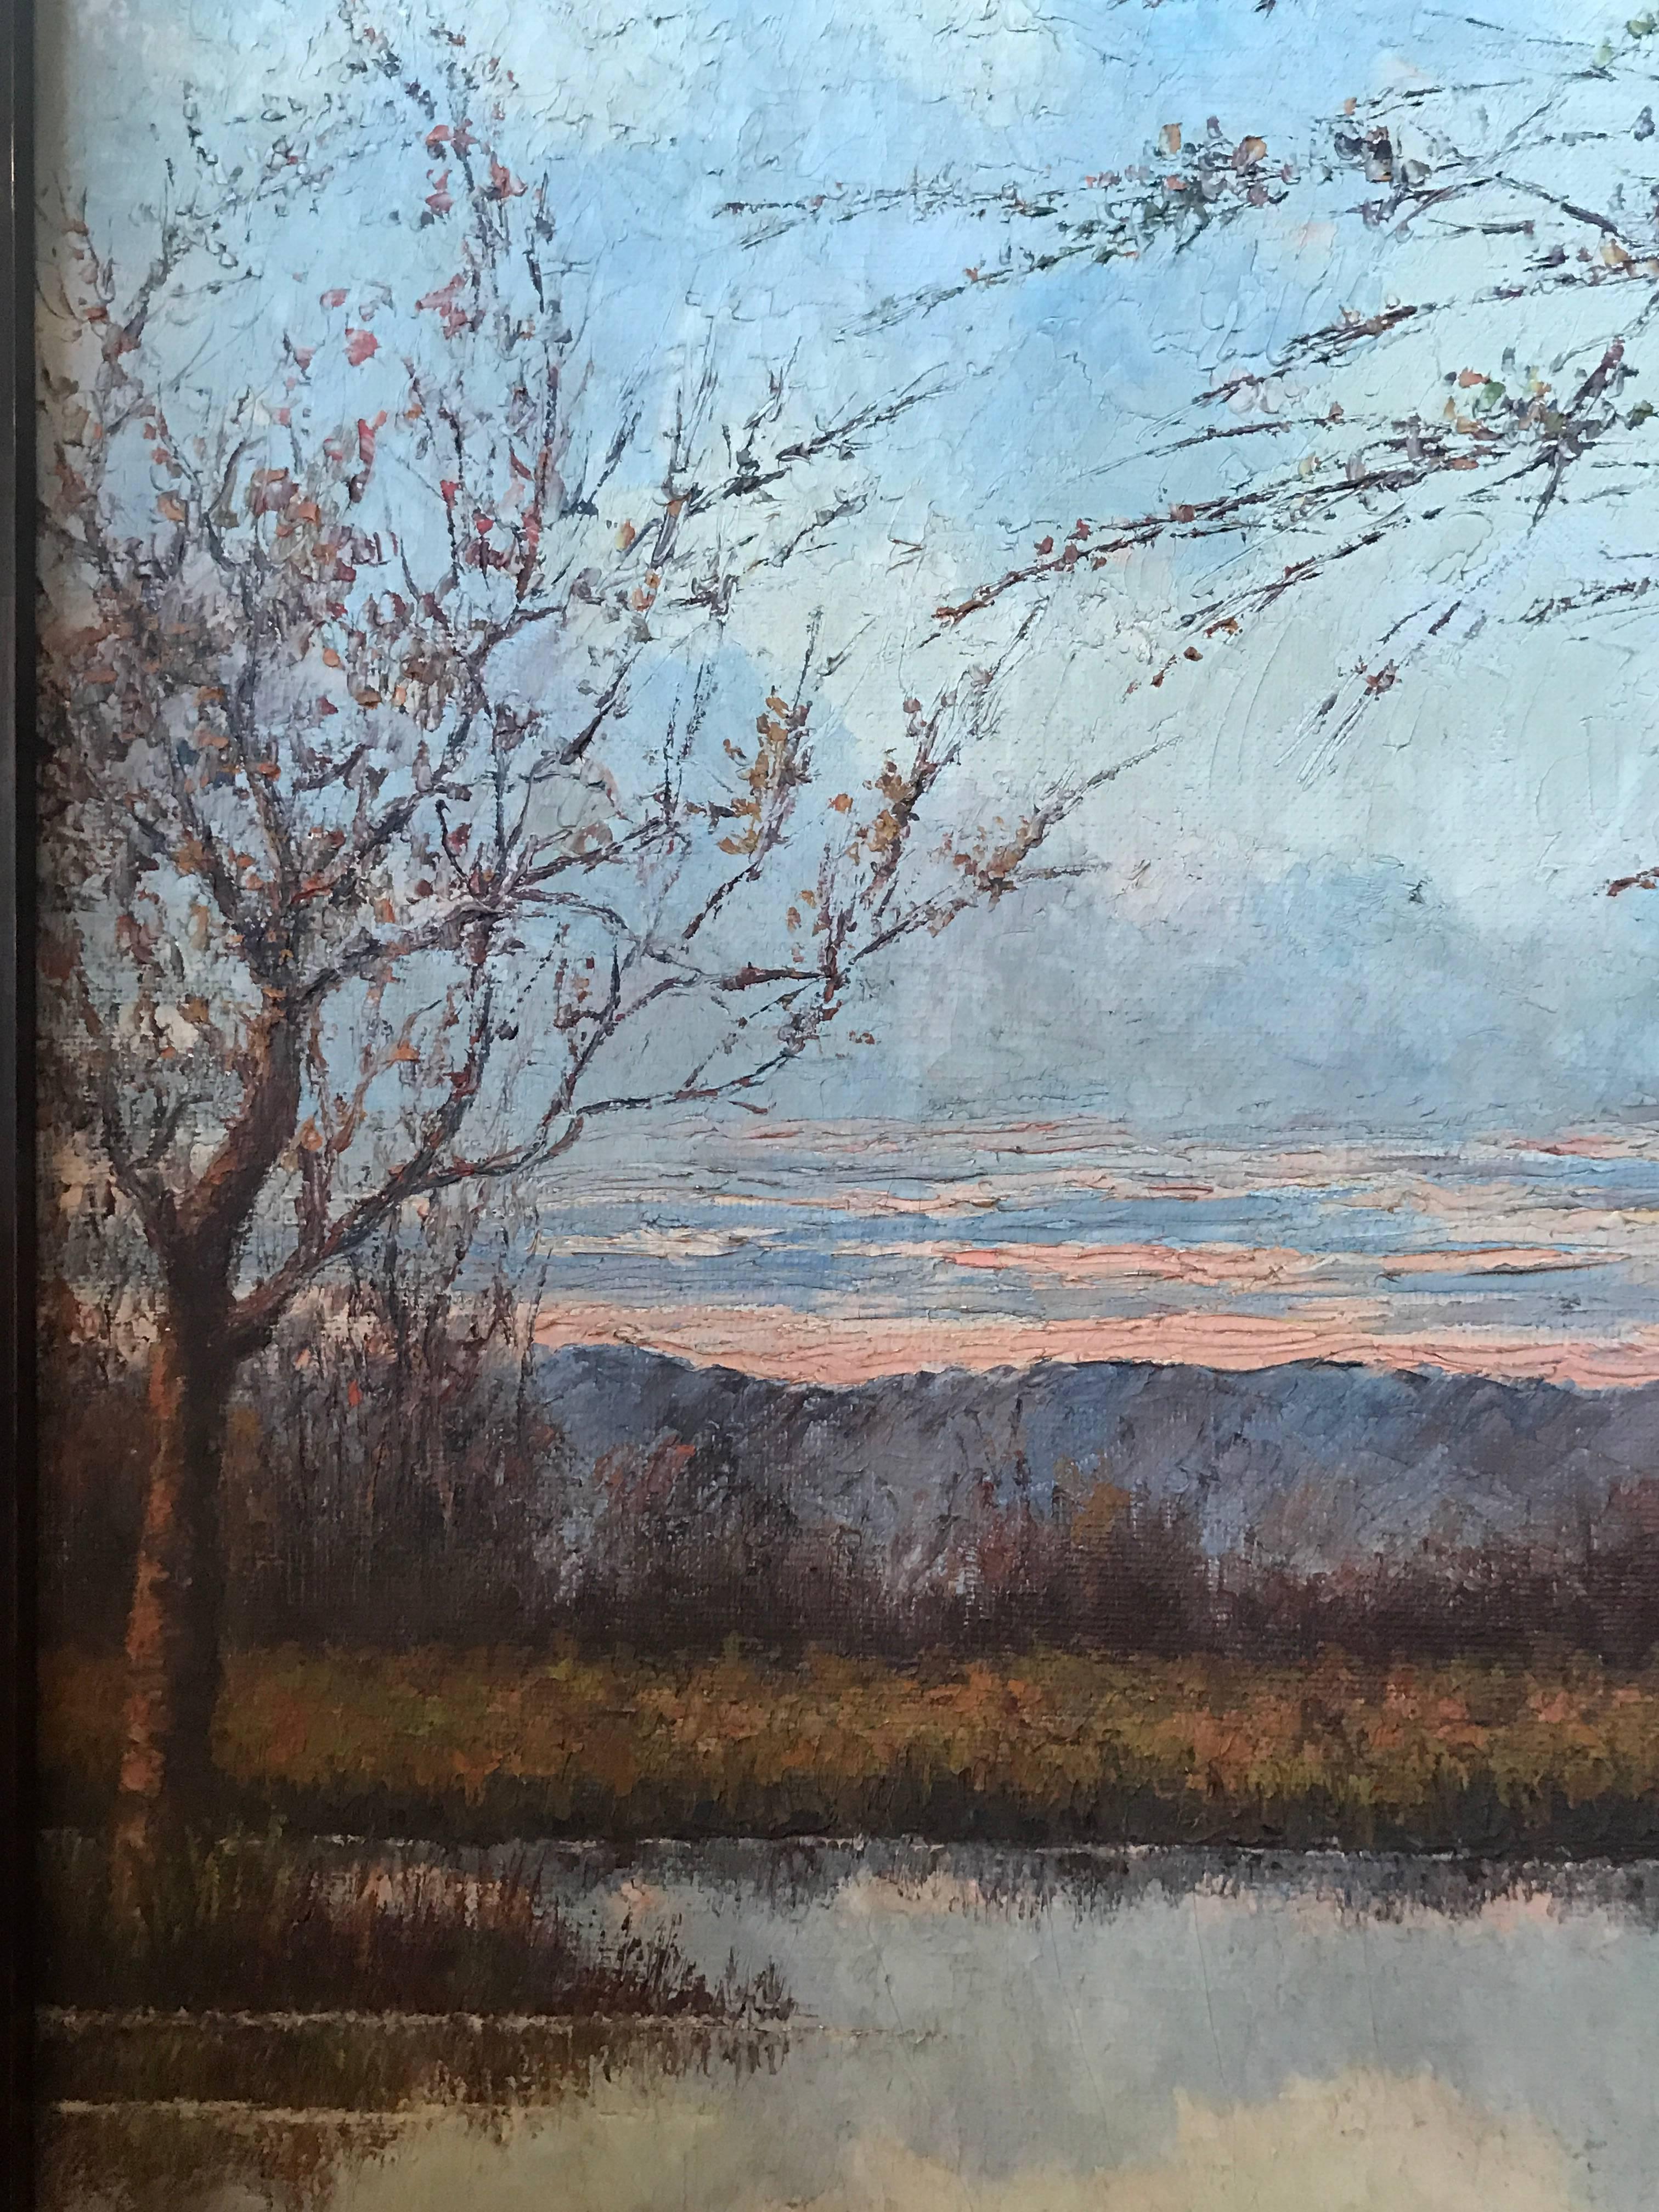 20th Century Framed Oil on Canvas Painting or a Lake Landscape Signed and Dated, 1910